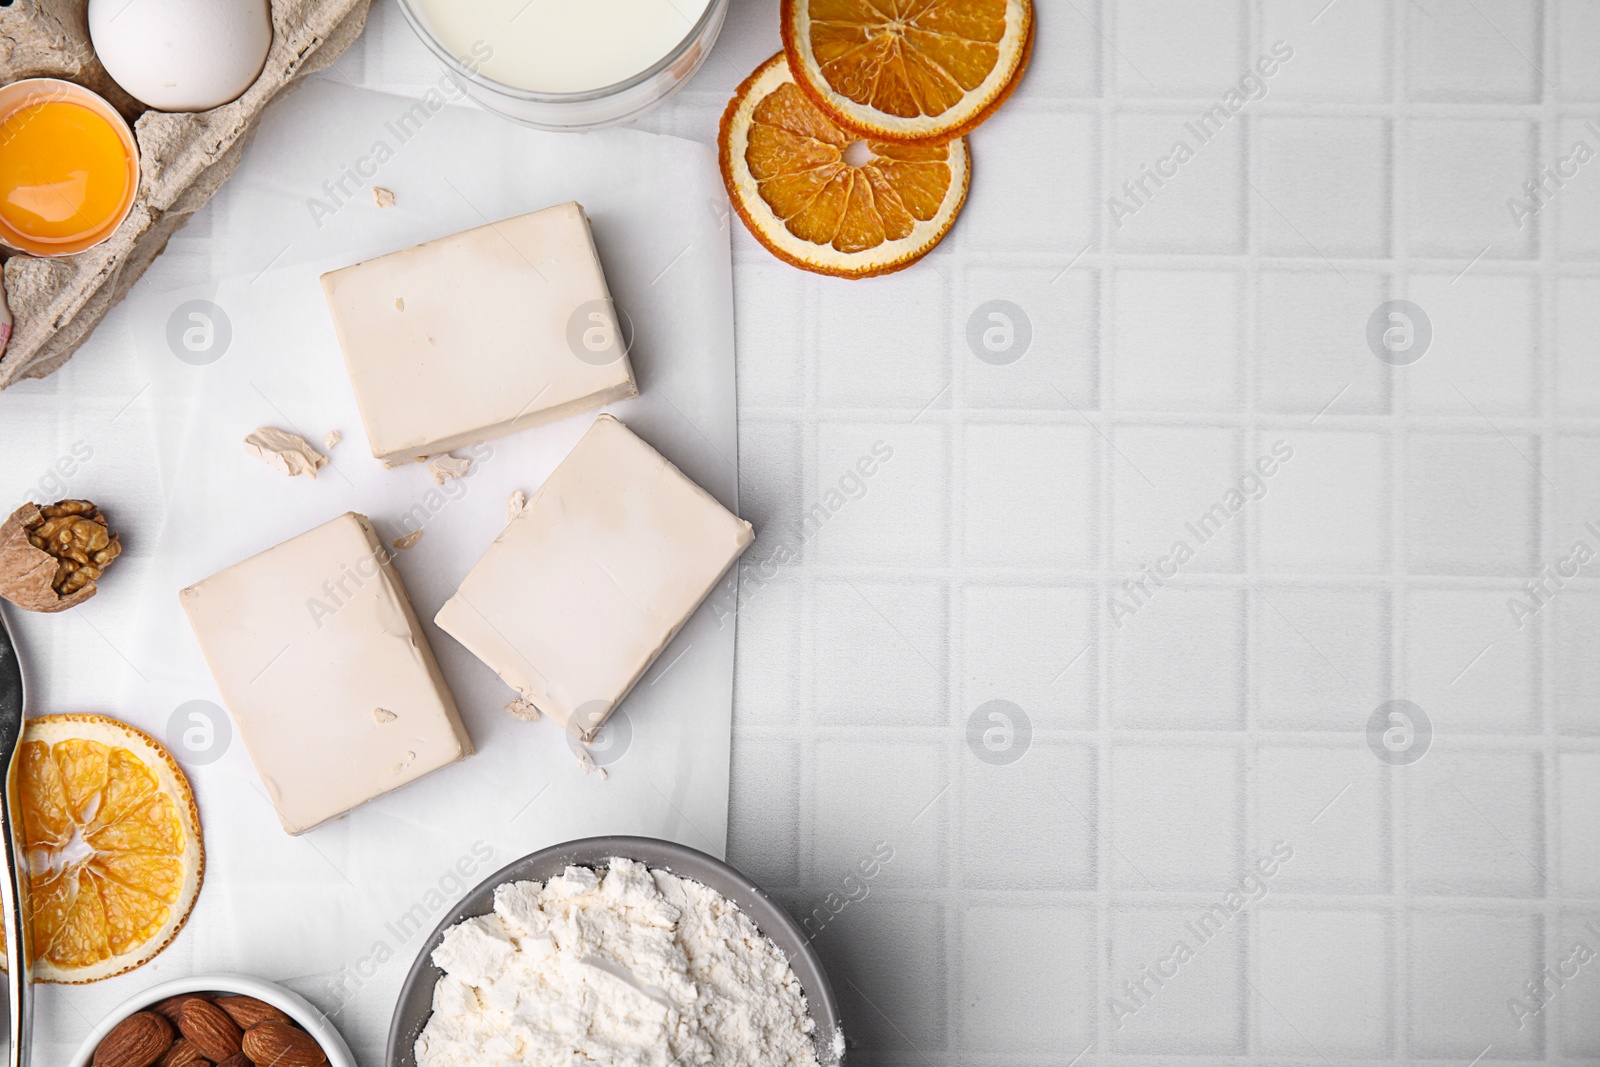 Photo of Yeast and ingredients for dough on white tiled table, flat lay. Space for text